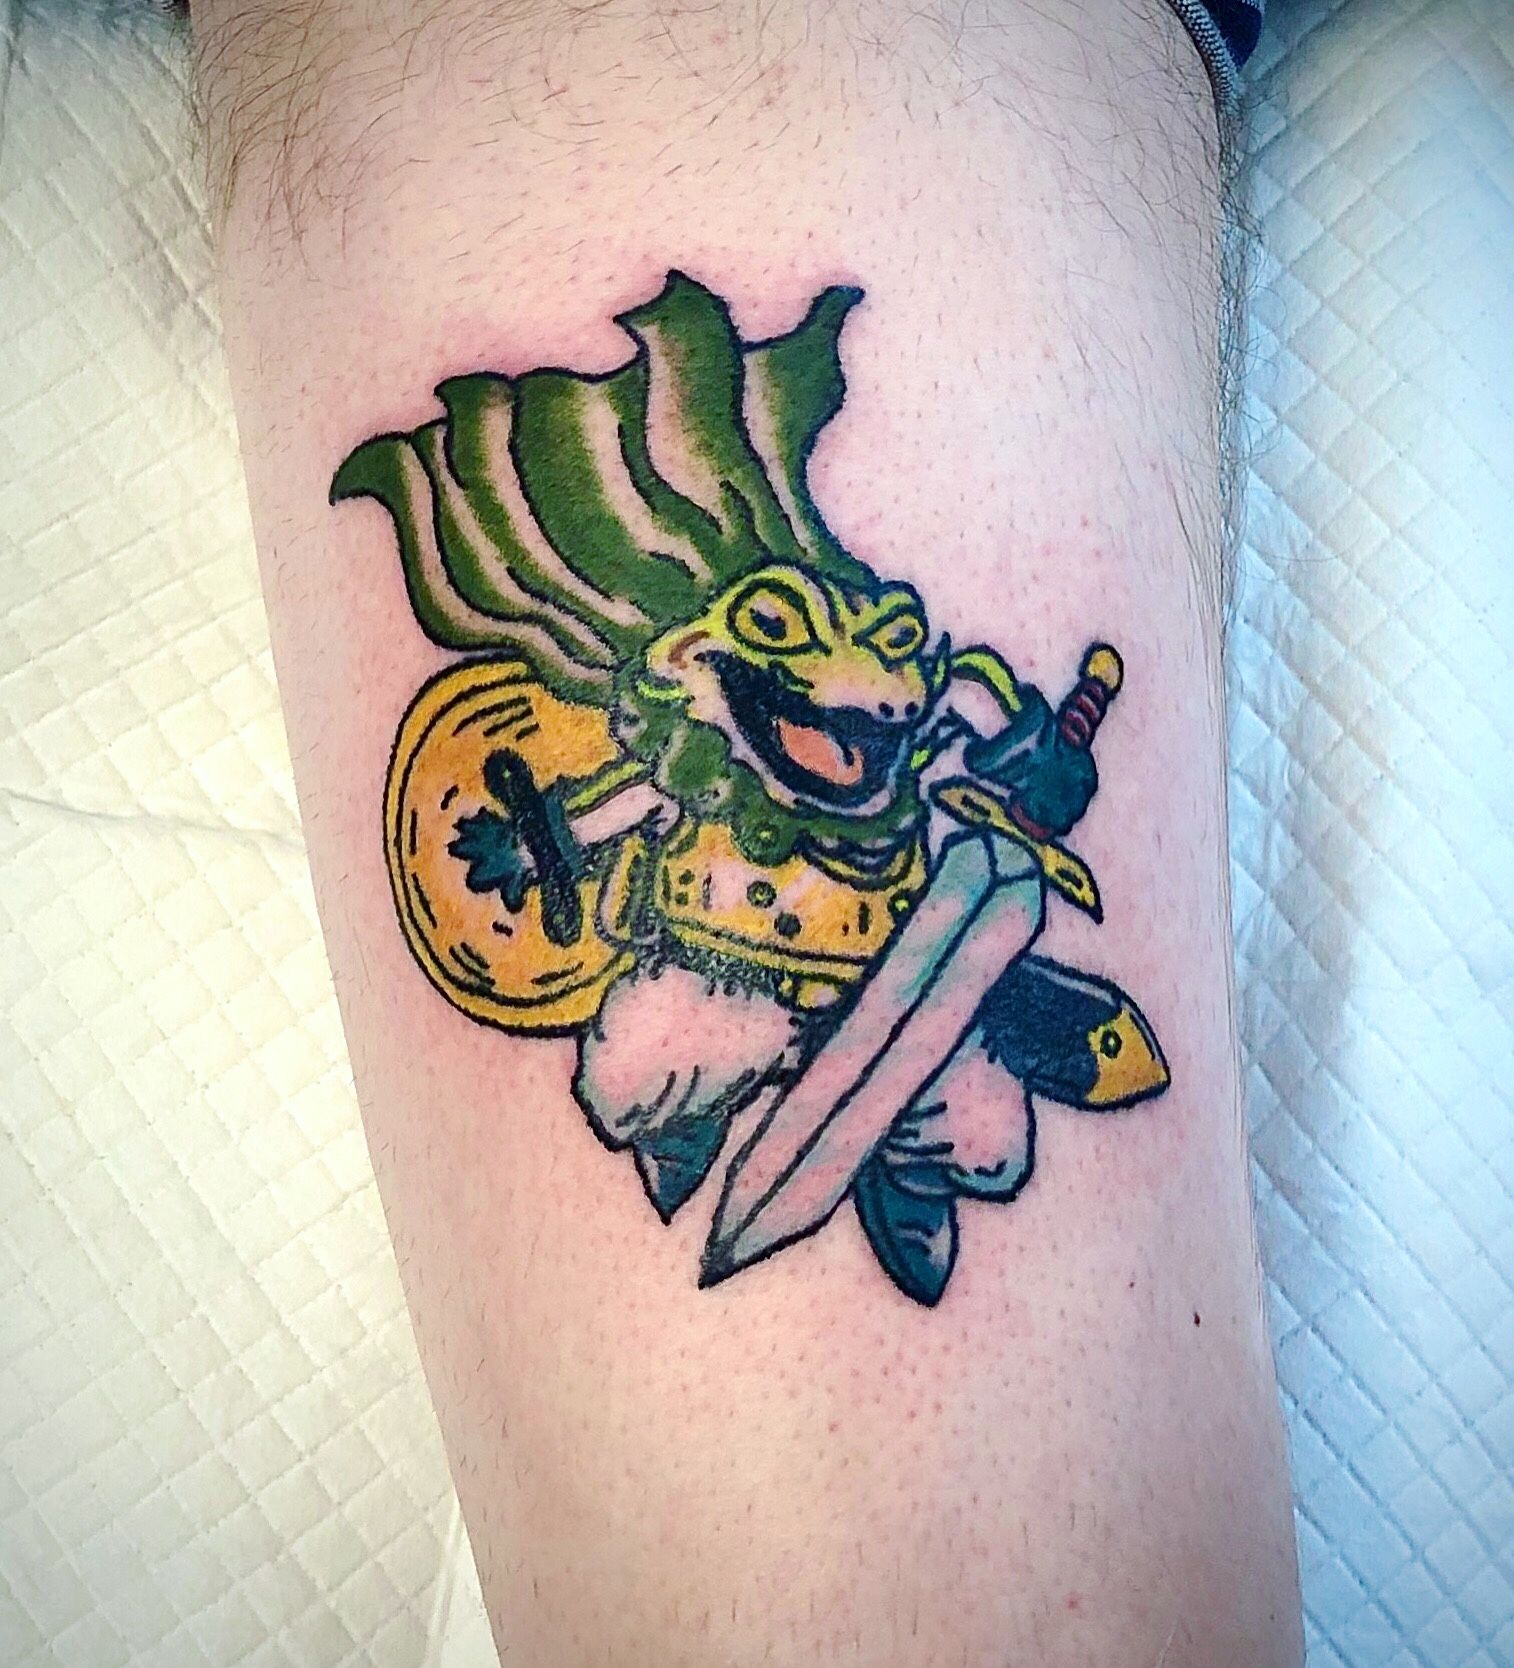 46 Chrono Trigger Tattoo Designs You Need To See  alexie